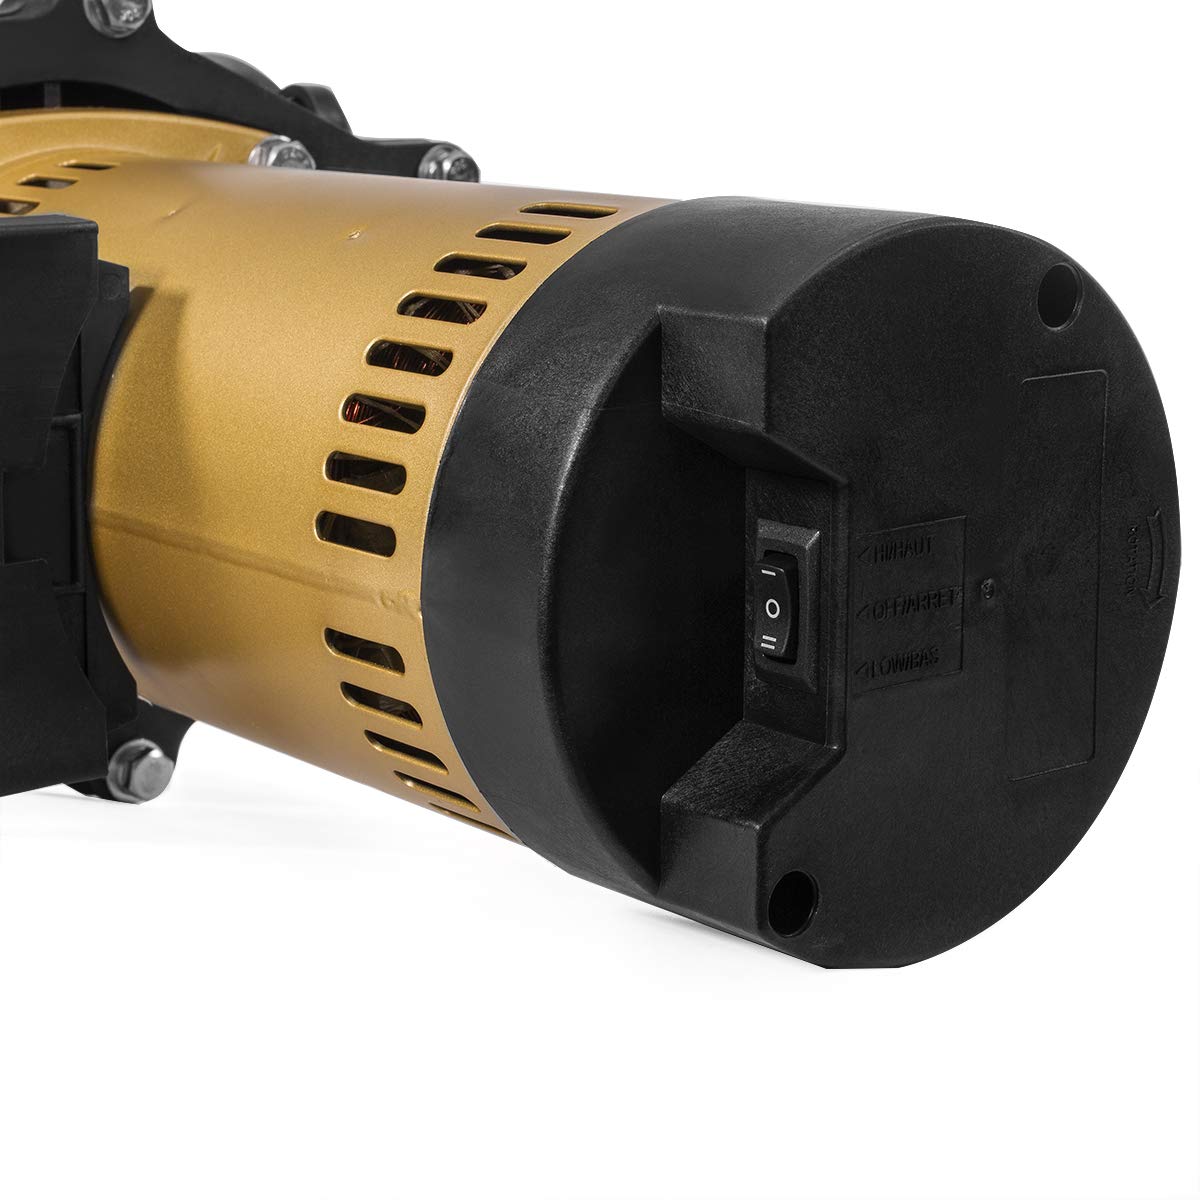 XtremepowerUS 2HP In-Ground Swimming Pool Pump Variable Speed 2" Inlet 230V High Flo w/ Slip-On Fitting